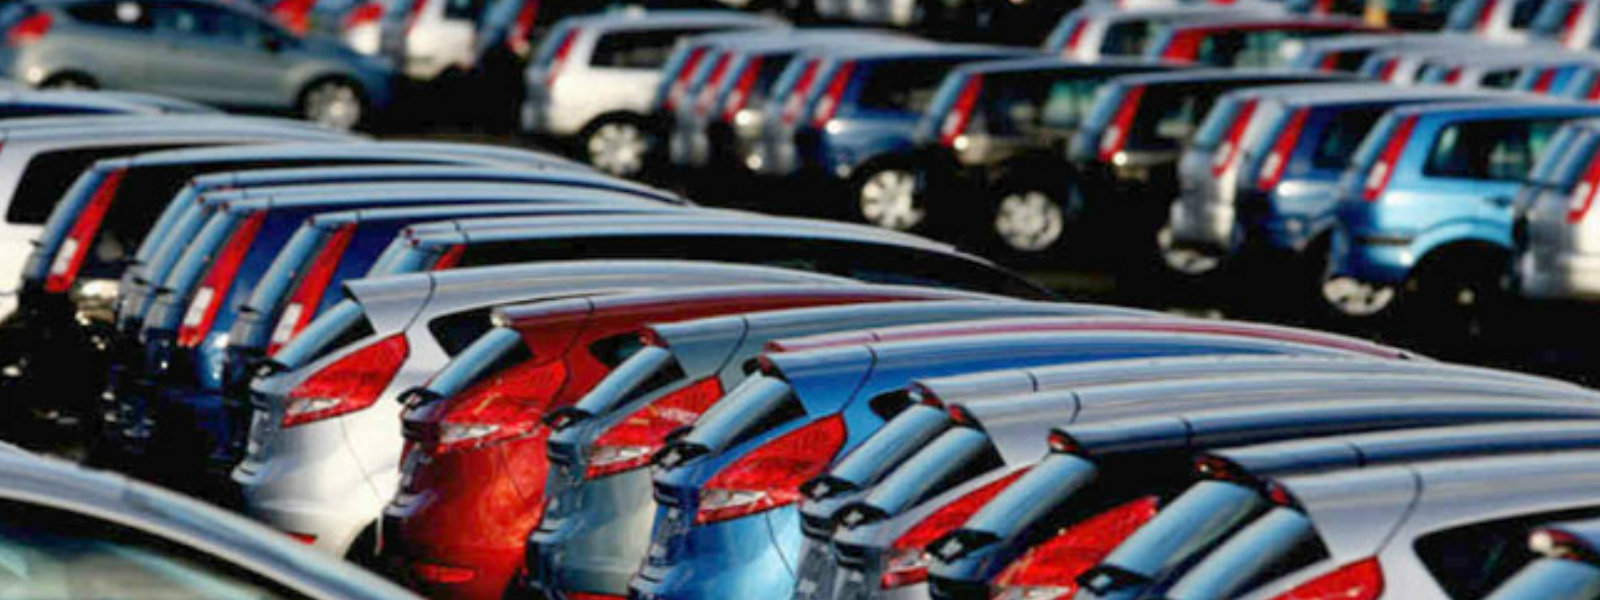 Has the government suspended vehicle imports?